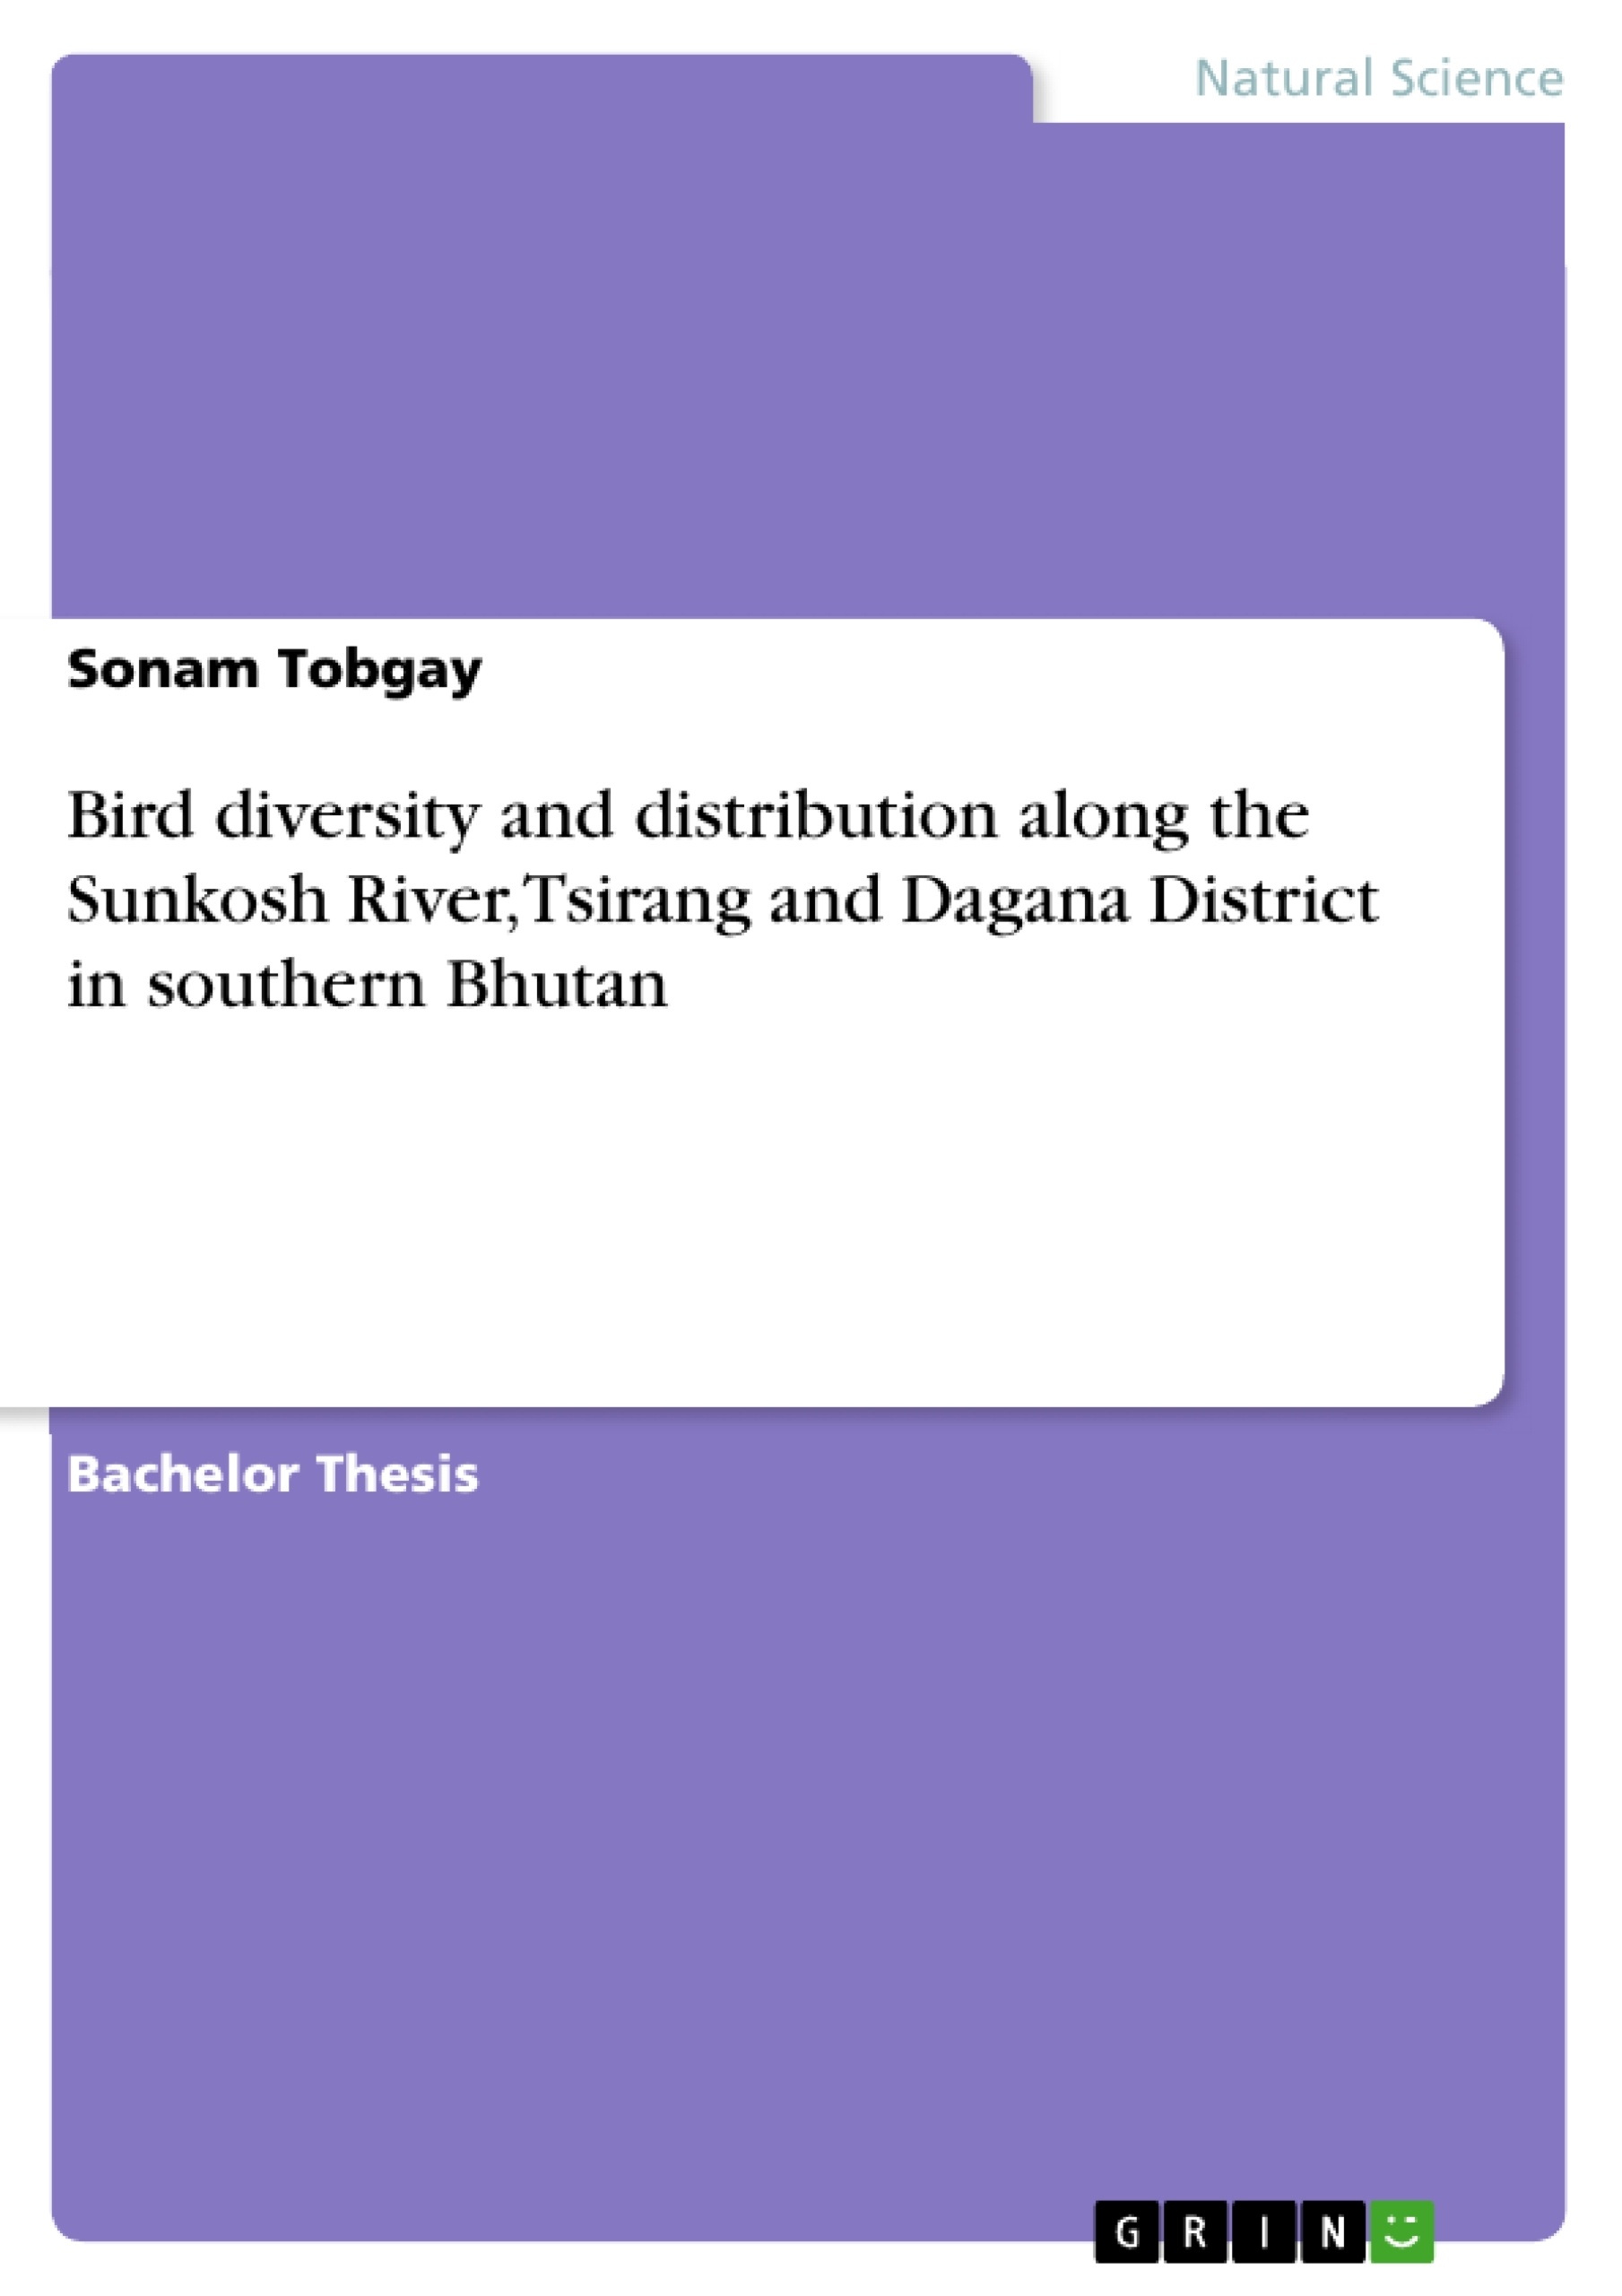 Title: Bird diversity and distribution along the Sunkosh River, Tsirang and Dagana District in southern Bhutan